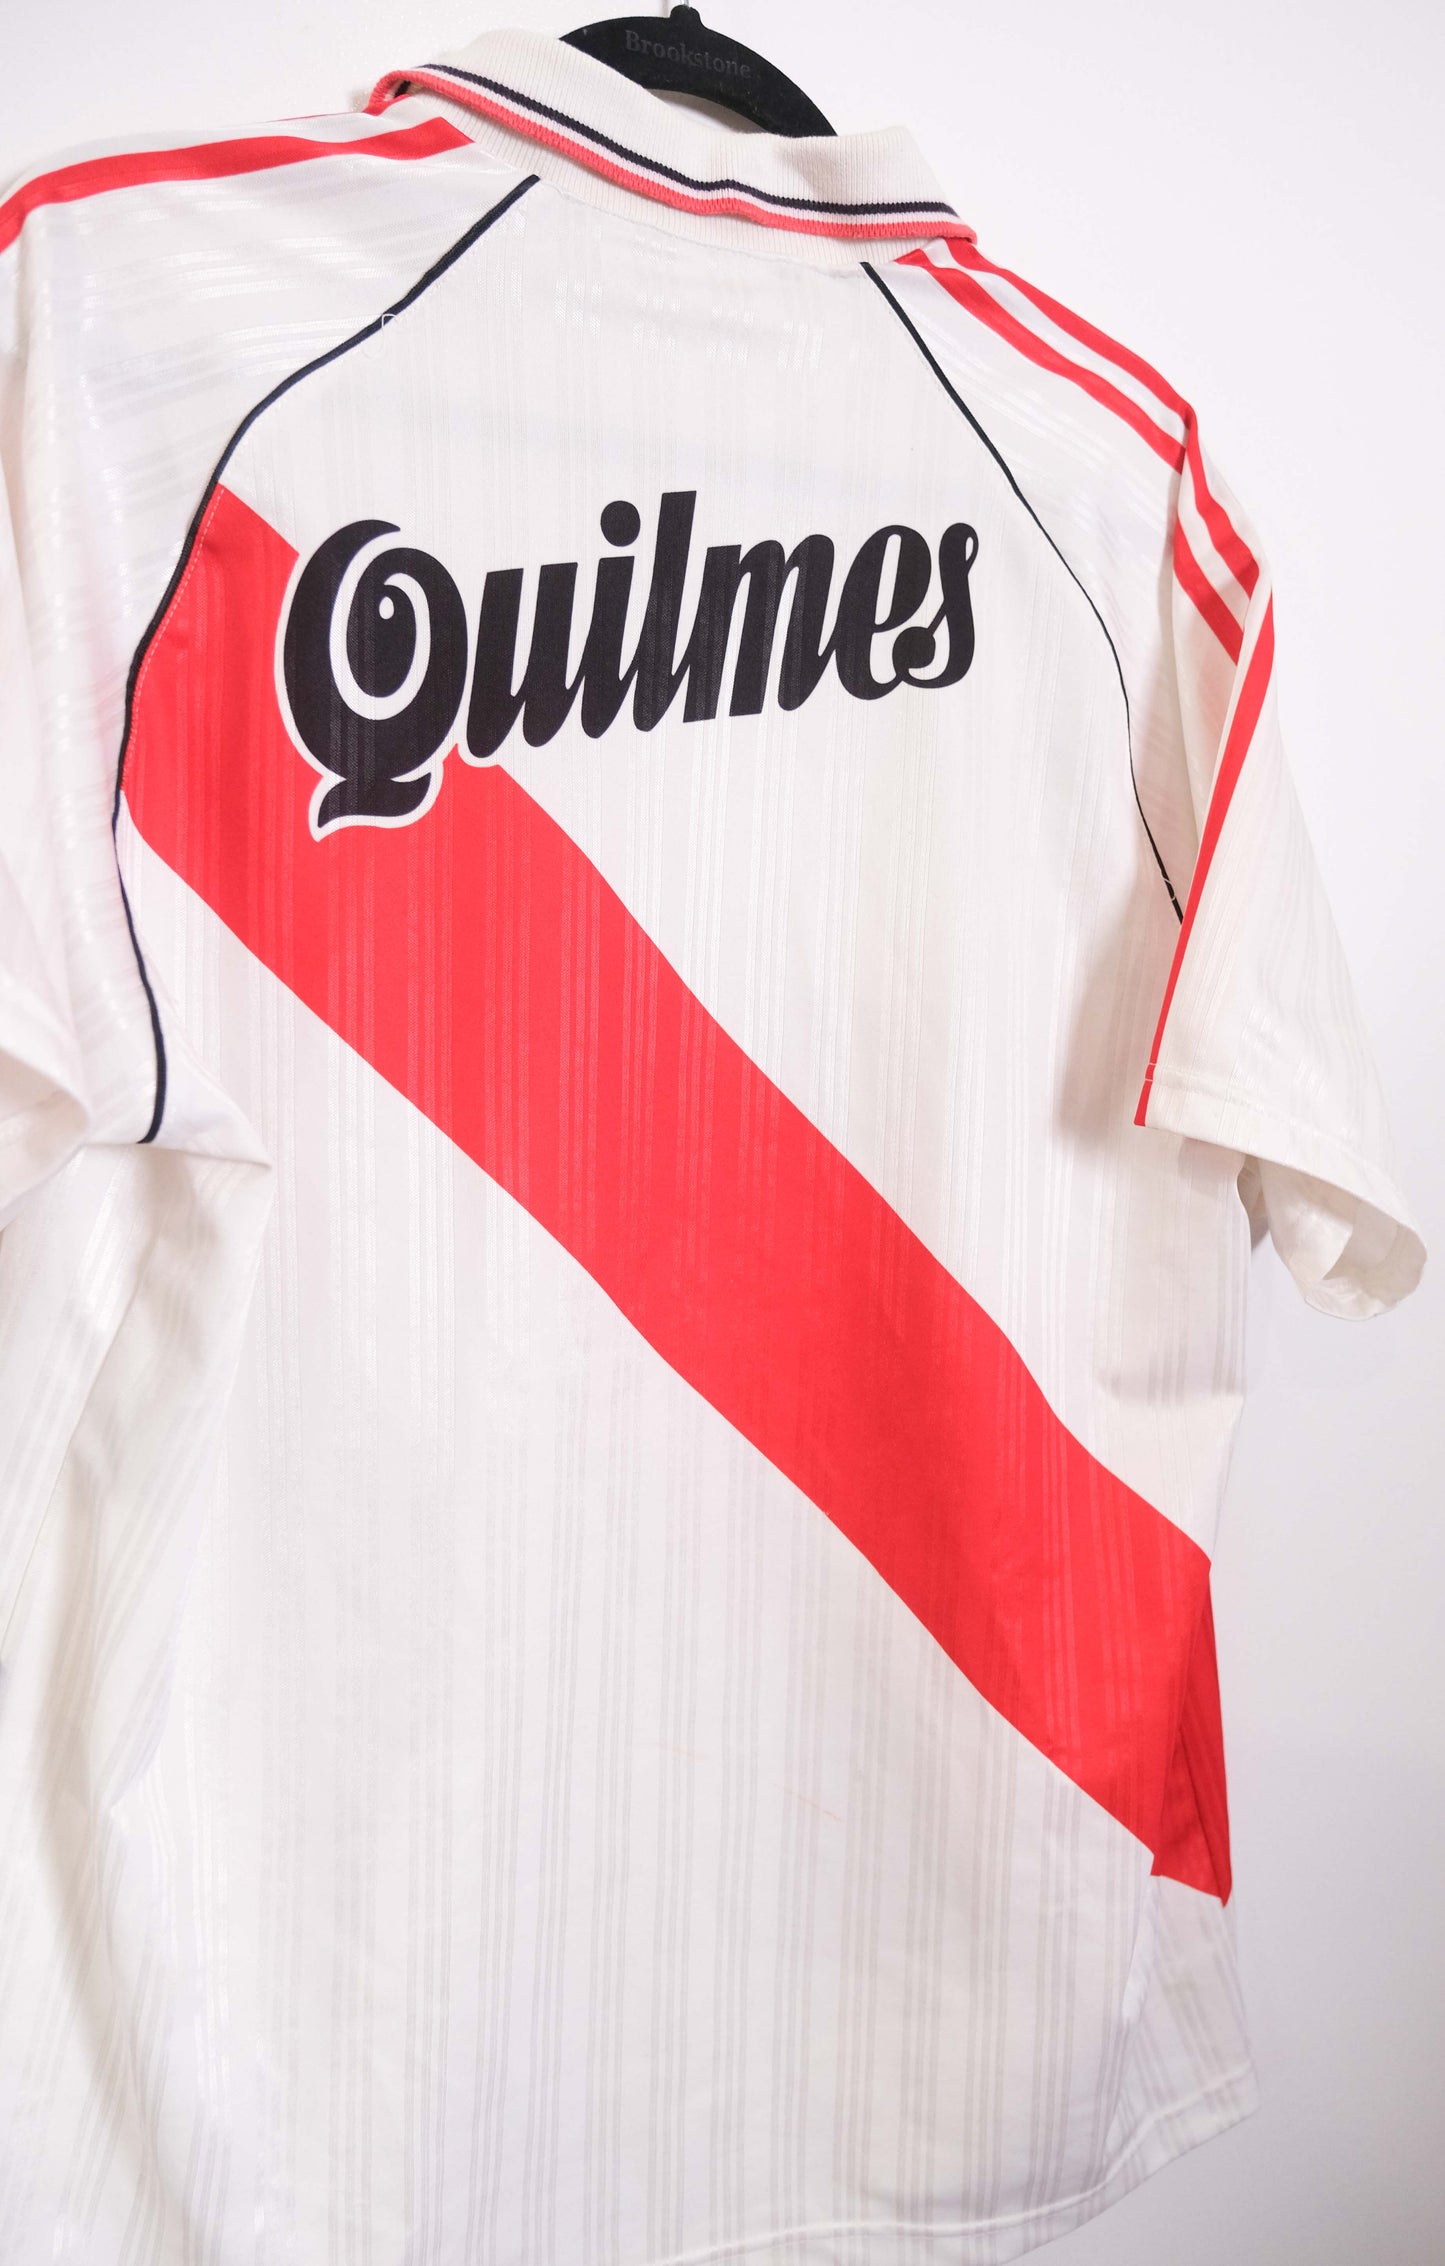 Authentic River Plate 1995/96 Home - Size L